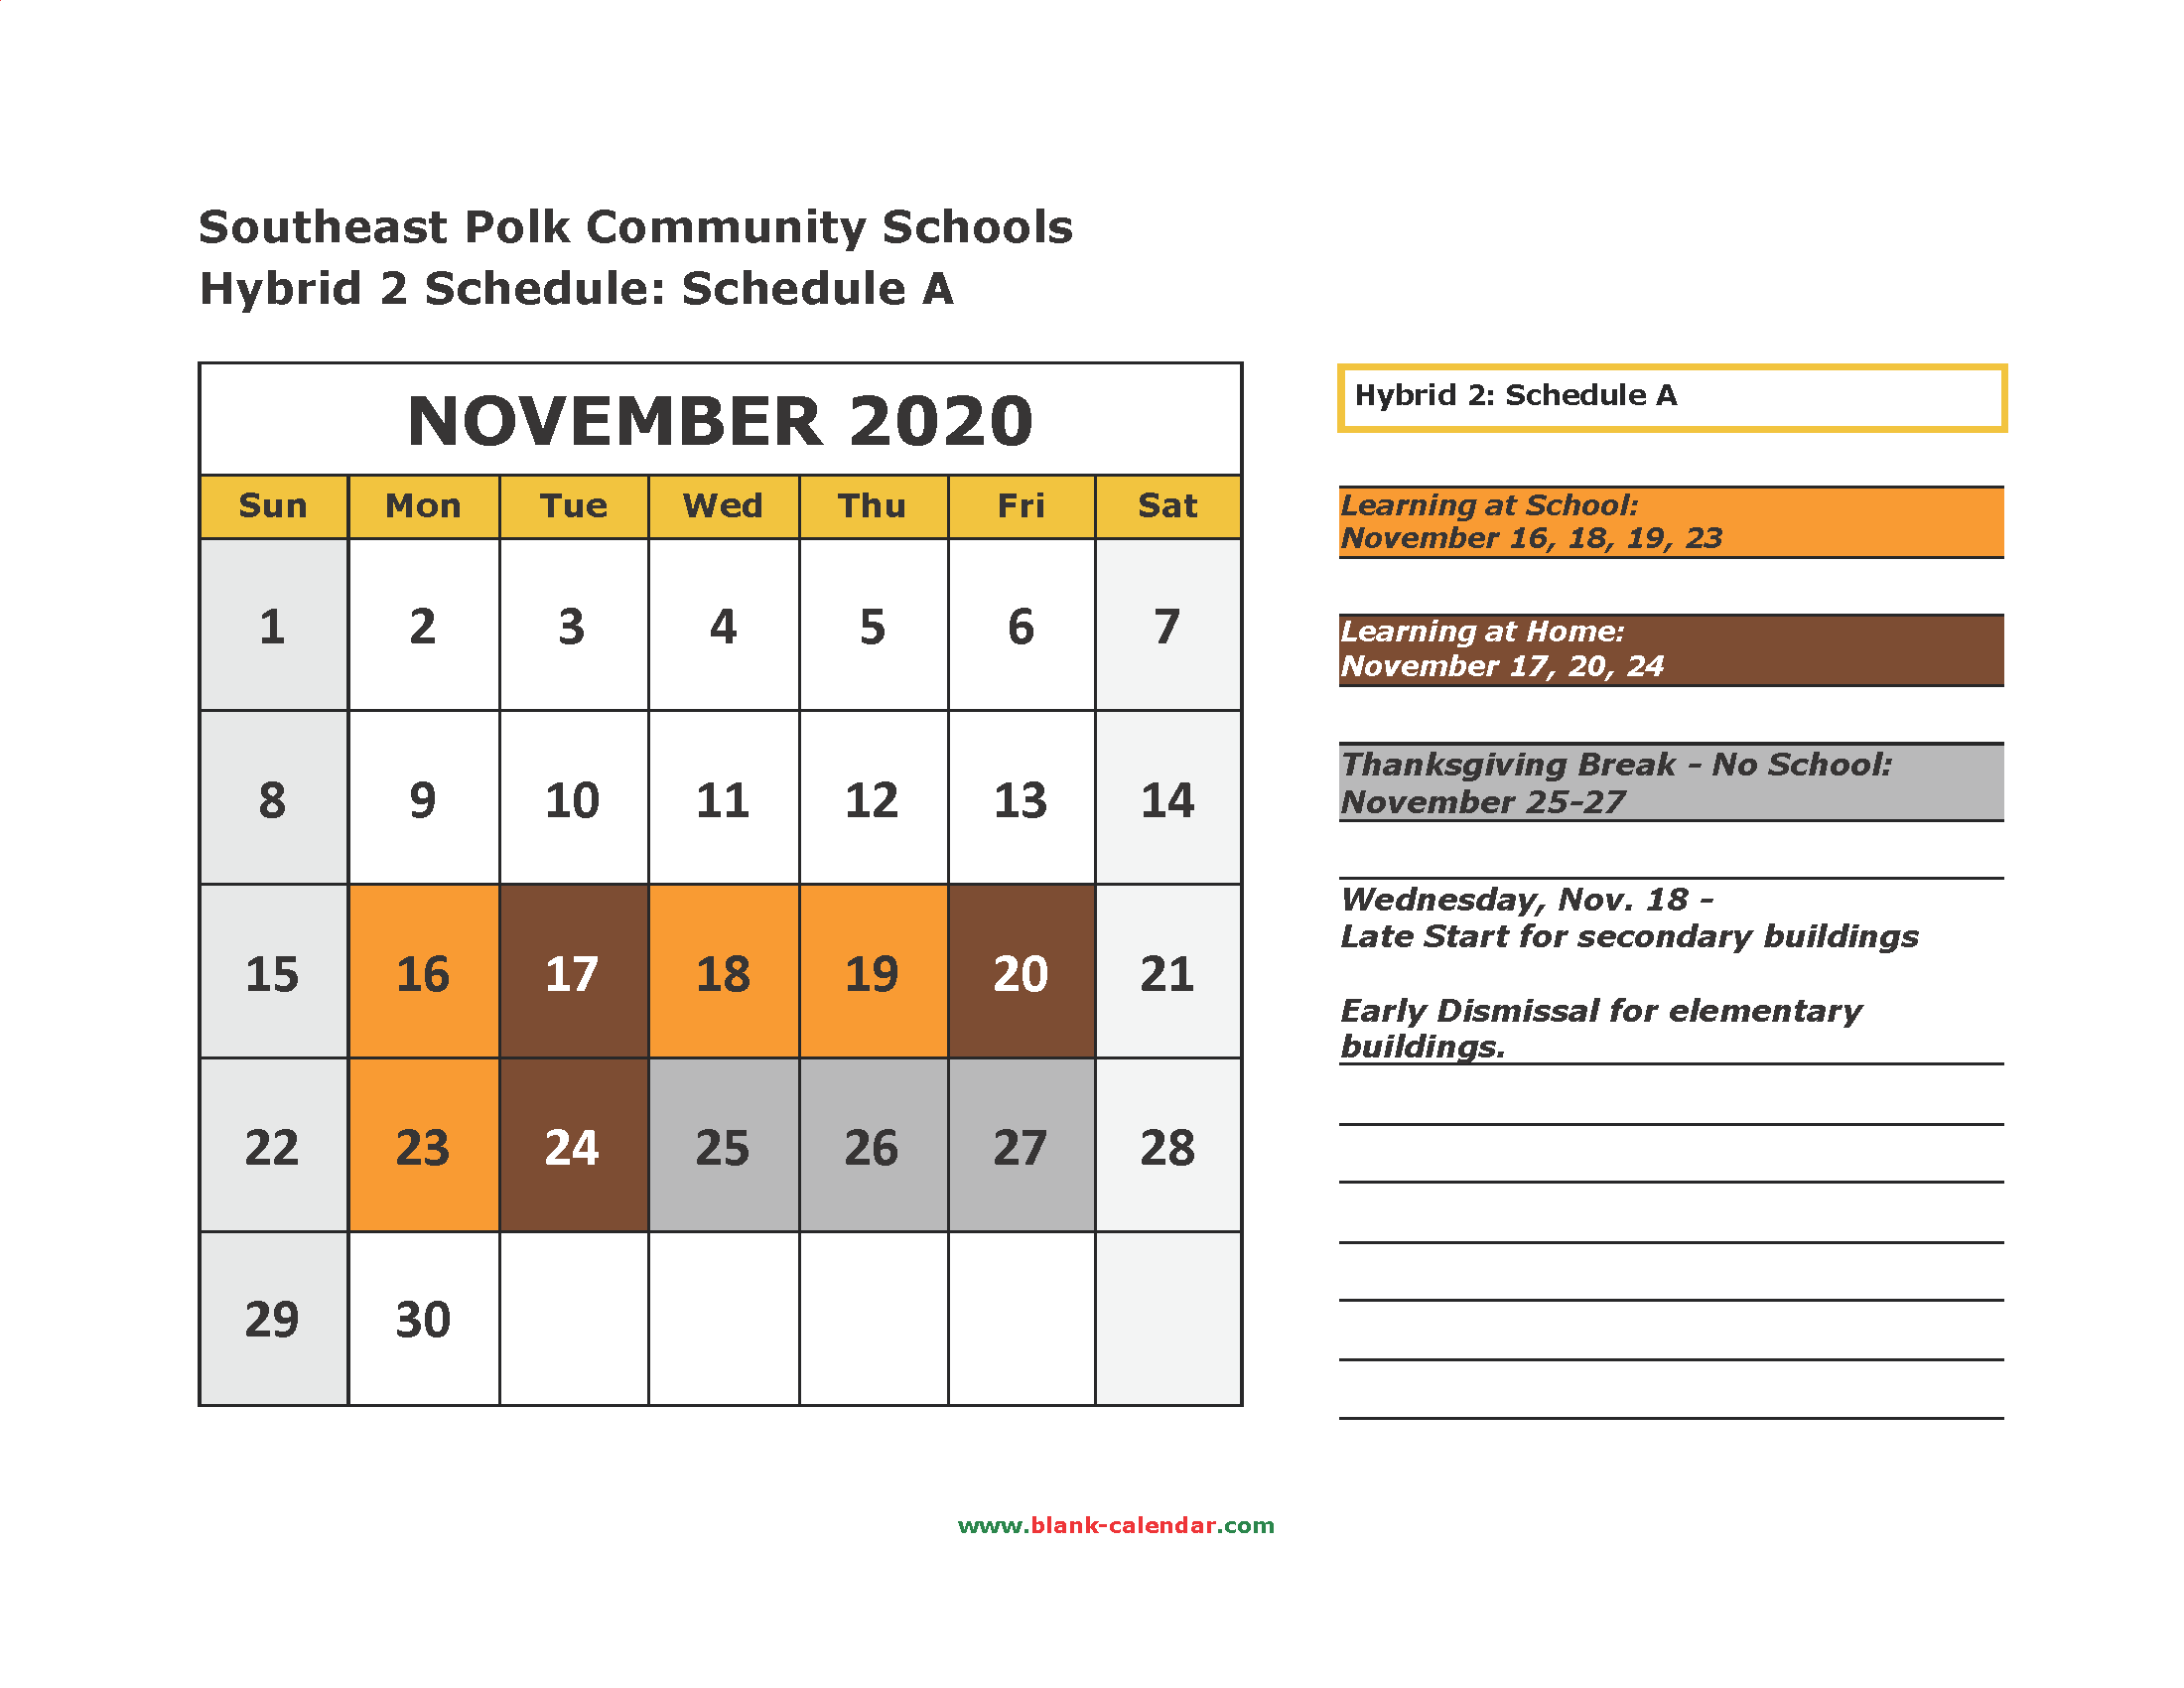 hybrid-2-schedule-a-and-b-calendars-posted-southeast-polk-community